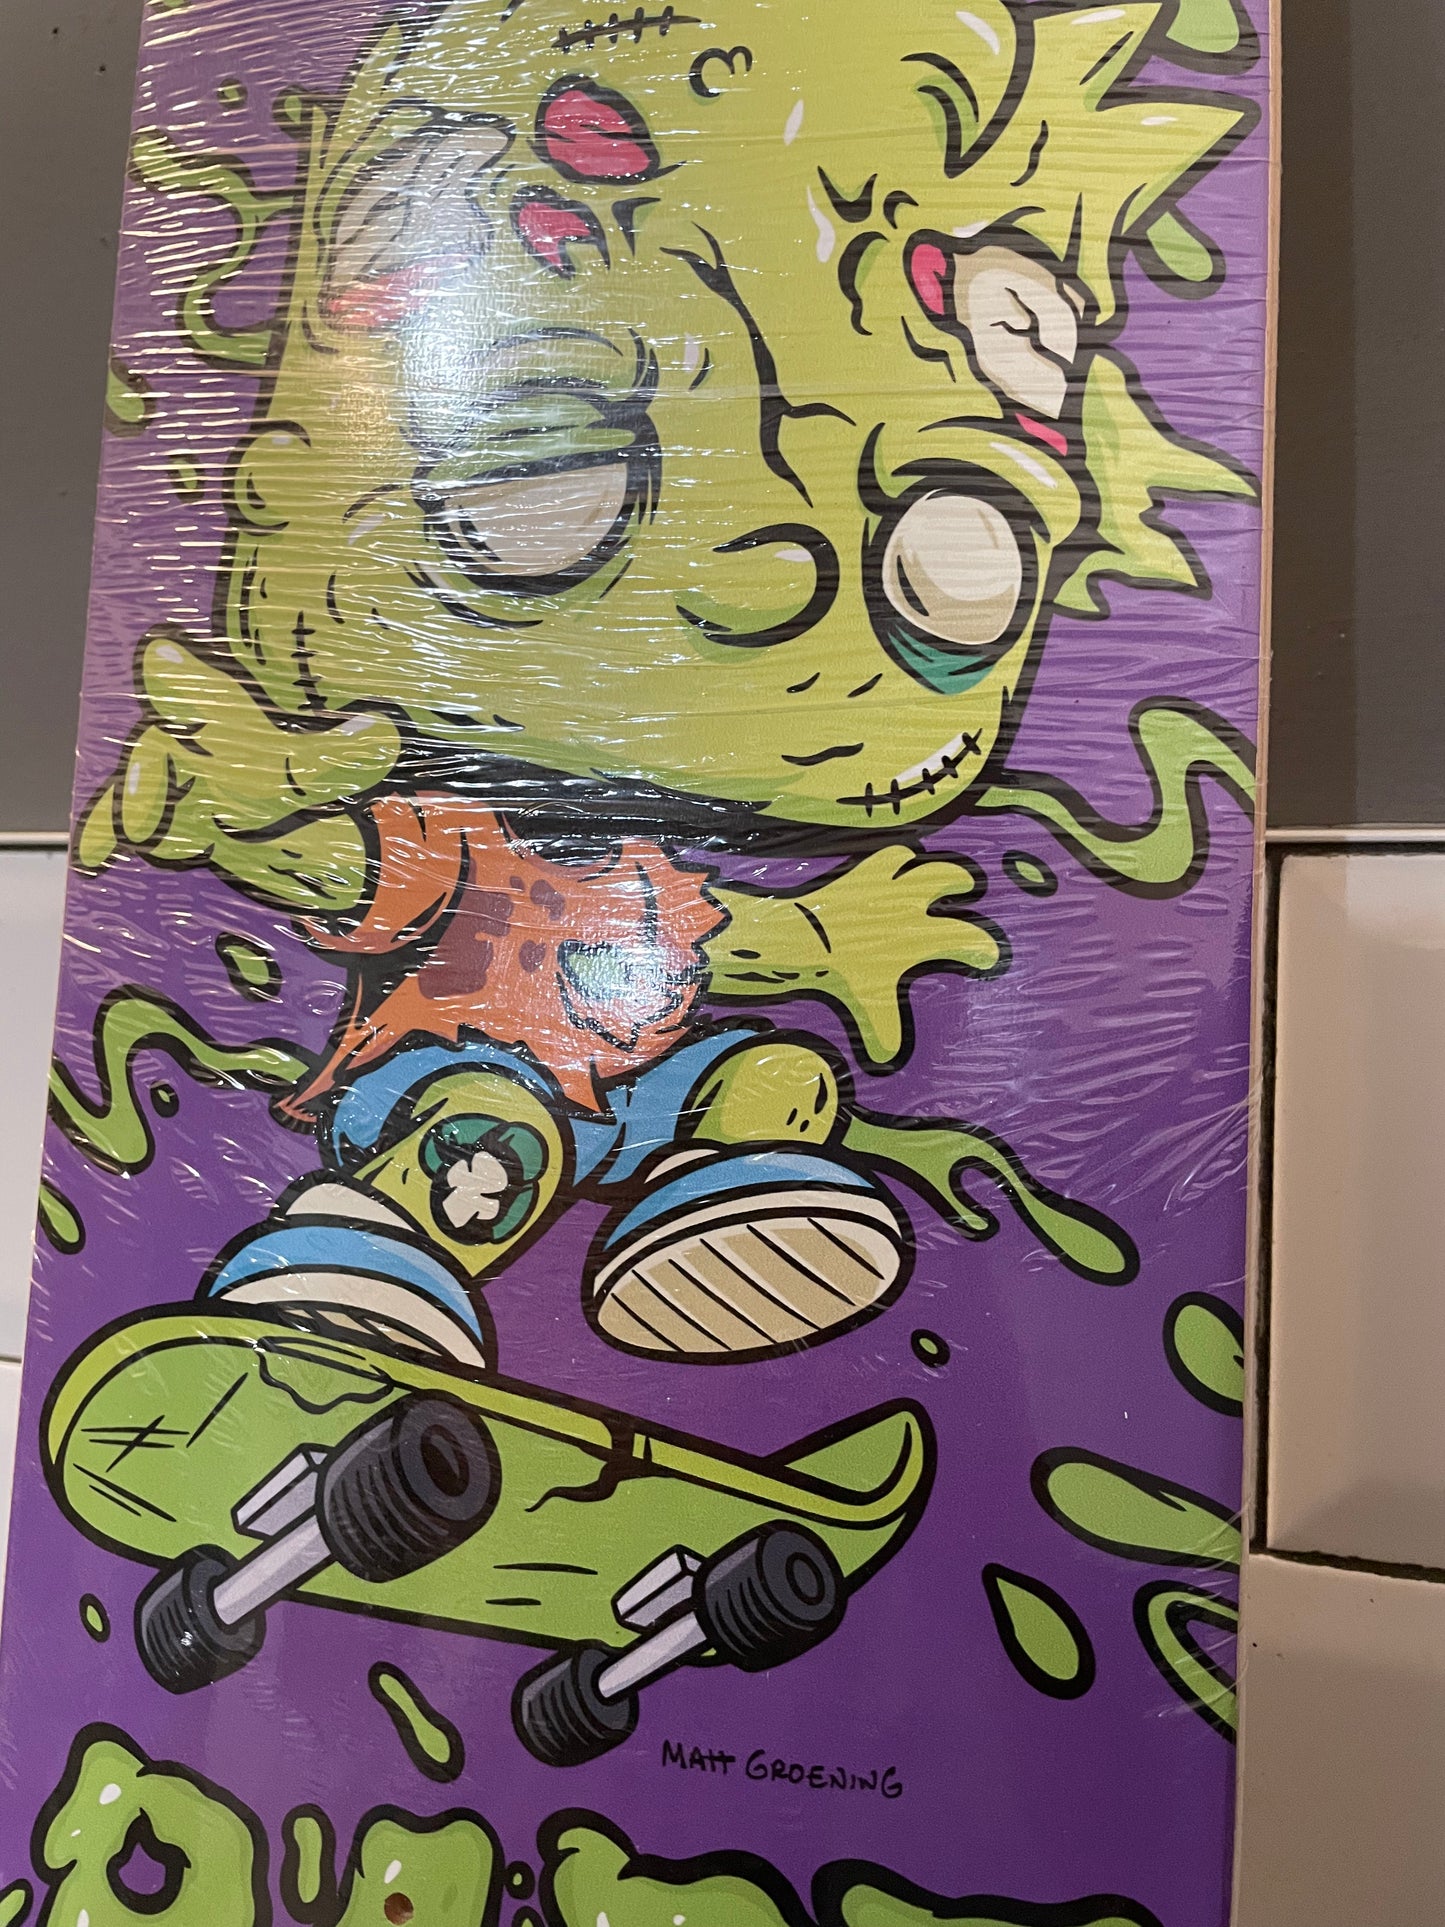 Funko - The Simpsons: Zombie Bart Skateboard Deck NYCC 2021 Limited Edition